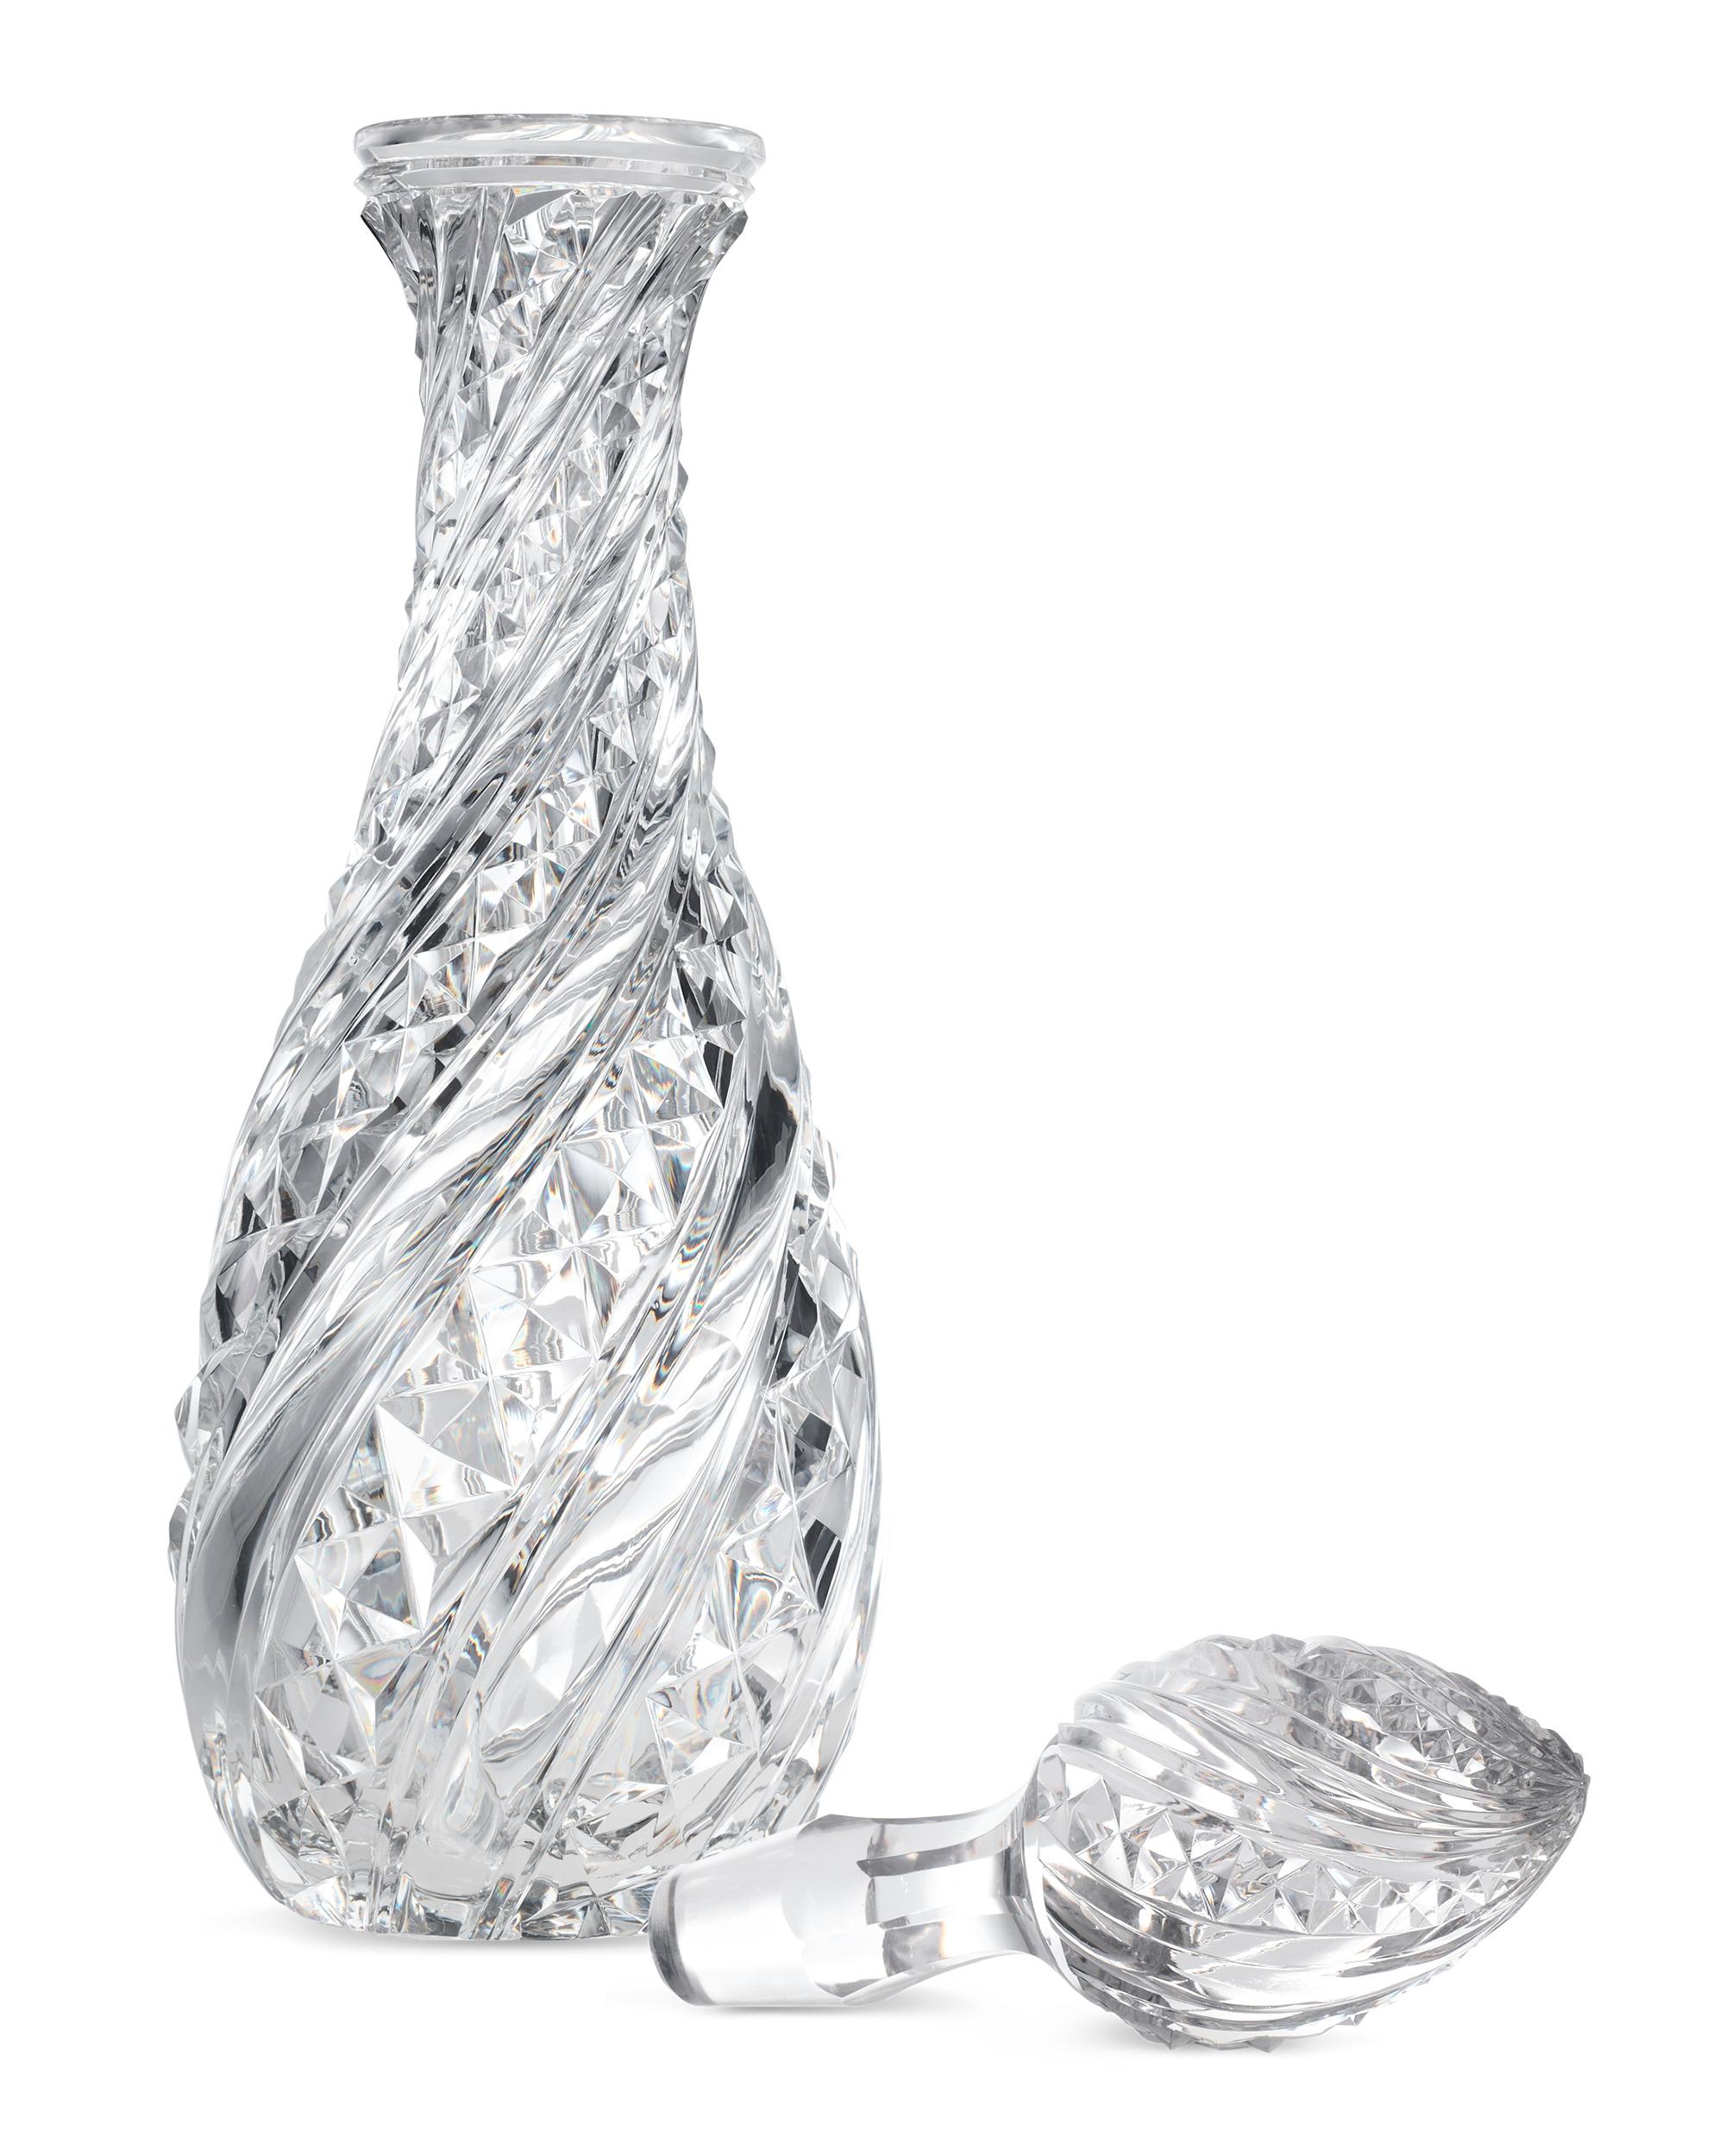 This monumental American Brilliant Period cut glass decanter is remarkable in each and every detail. Its deeply cut squares alternate between panels of clear, spiraling glass, similar to the Russian and Swirled Pillar pattern. This motif highlights